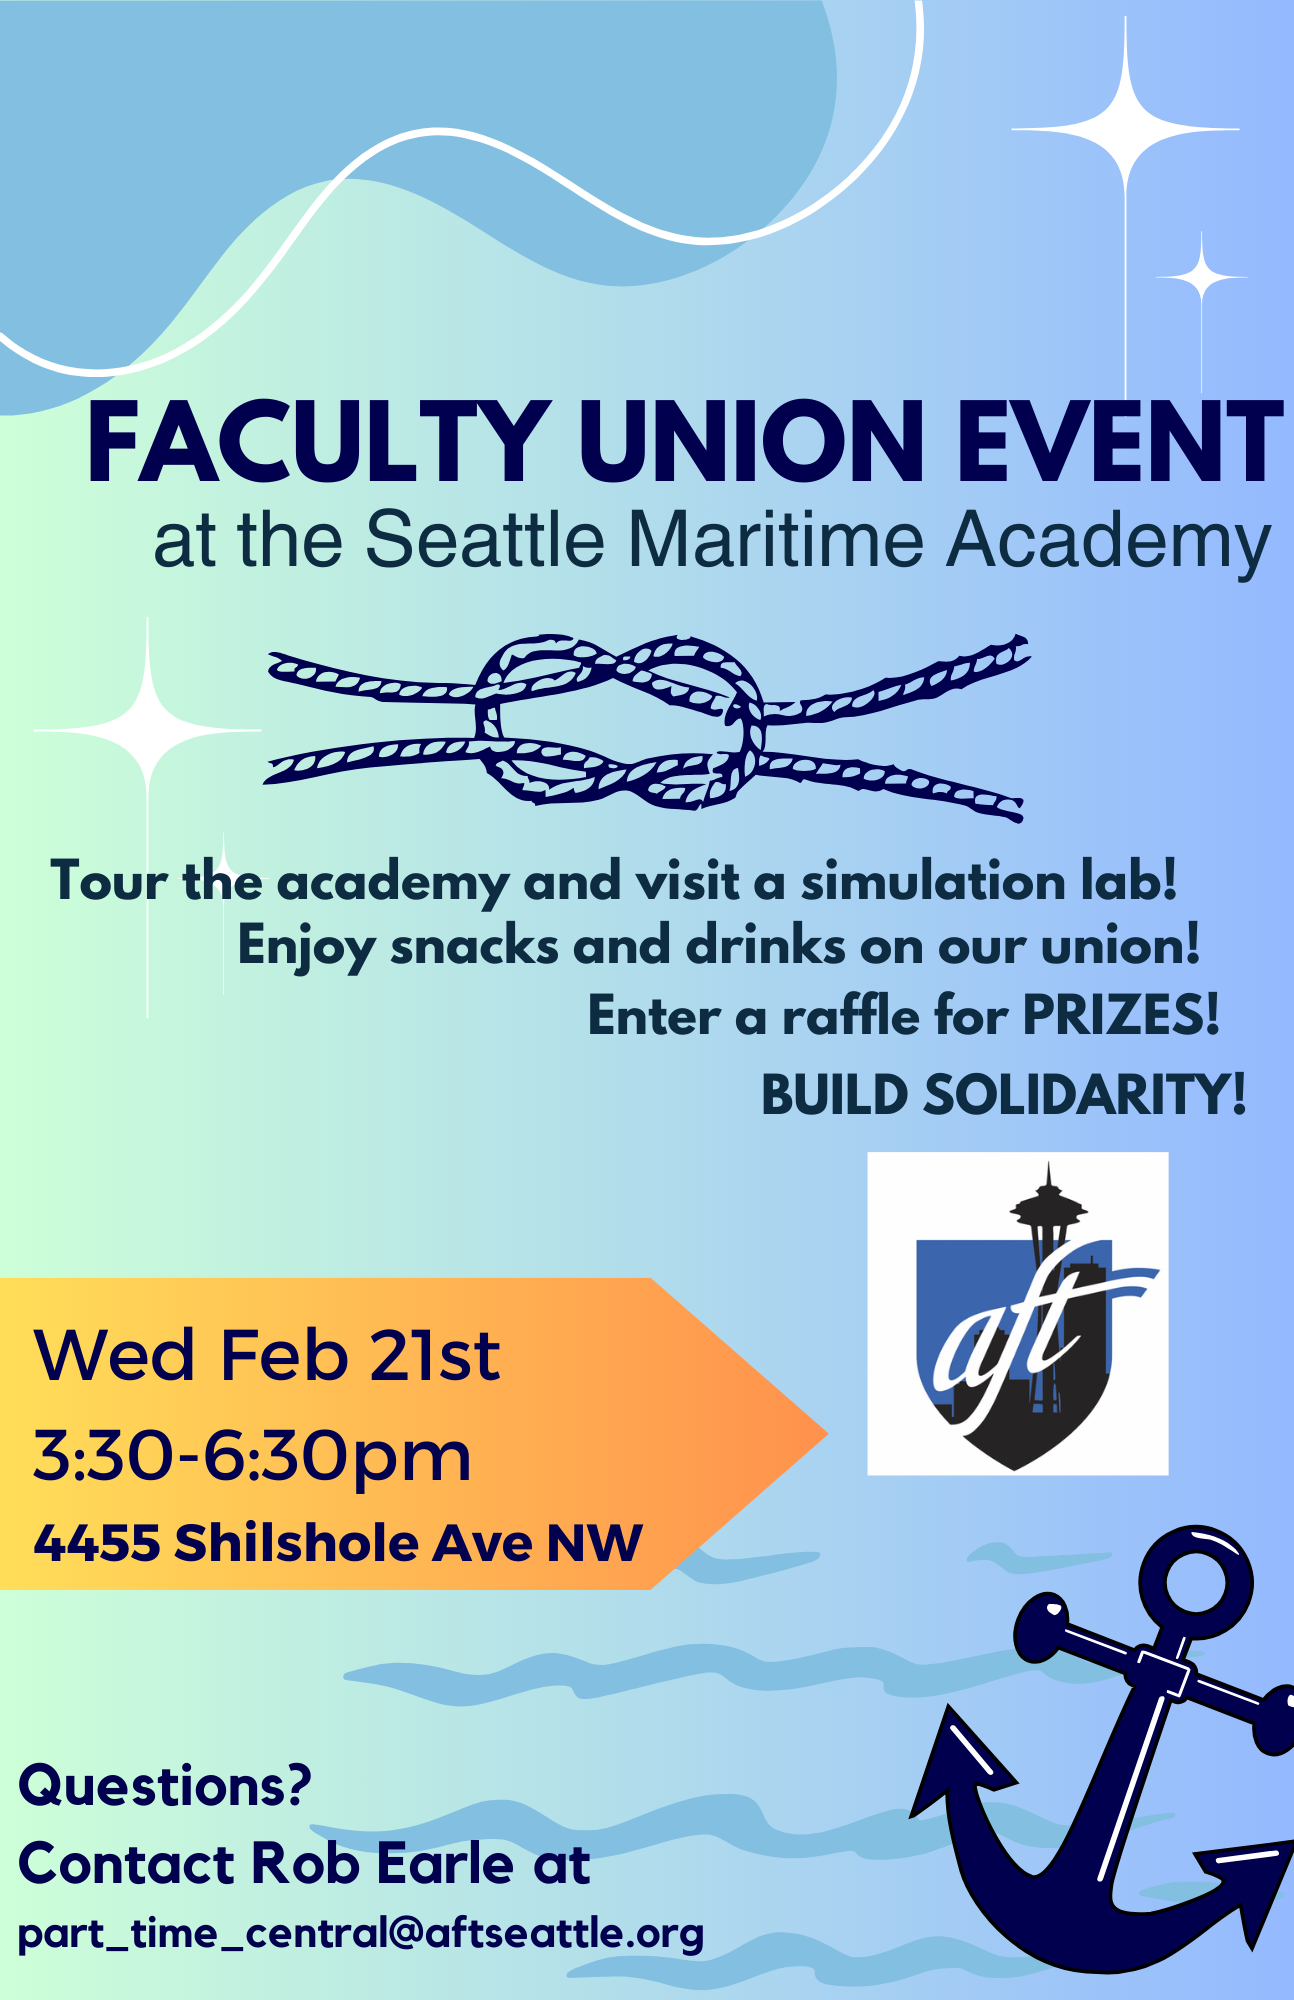 Faculty Union Event at Seattle Maritime Academy